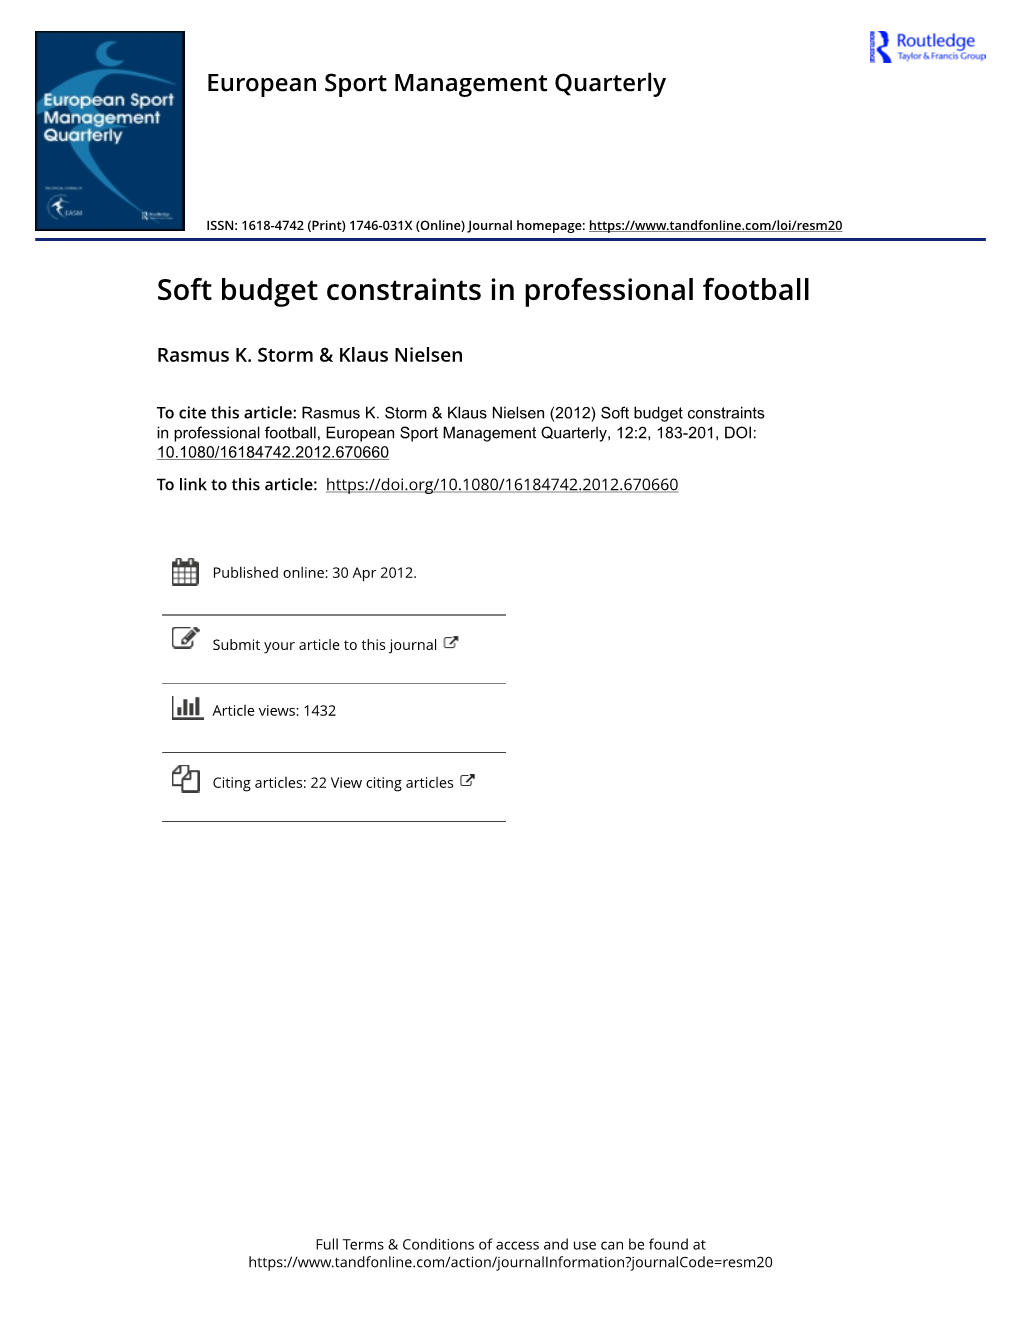 Soft Budget Constraints in Professional Football